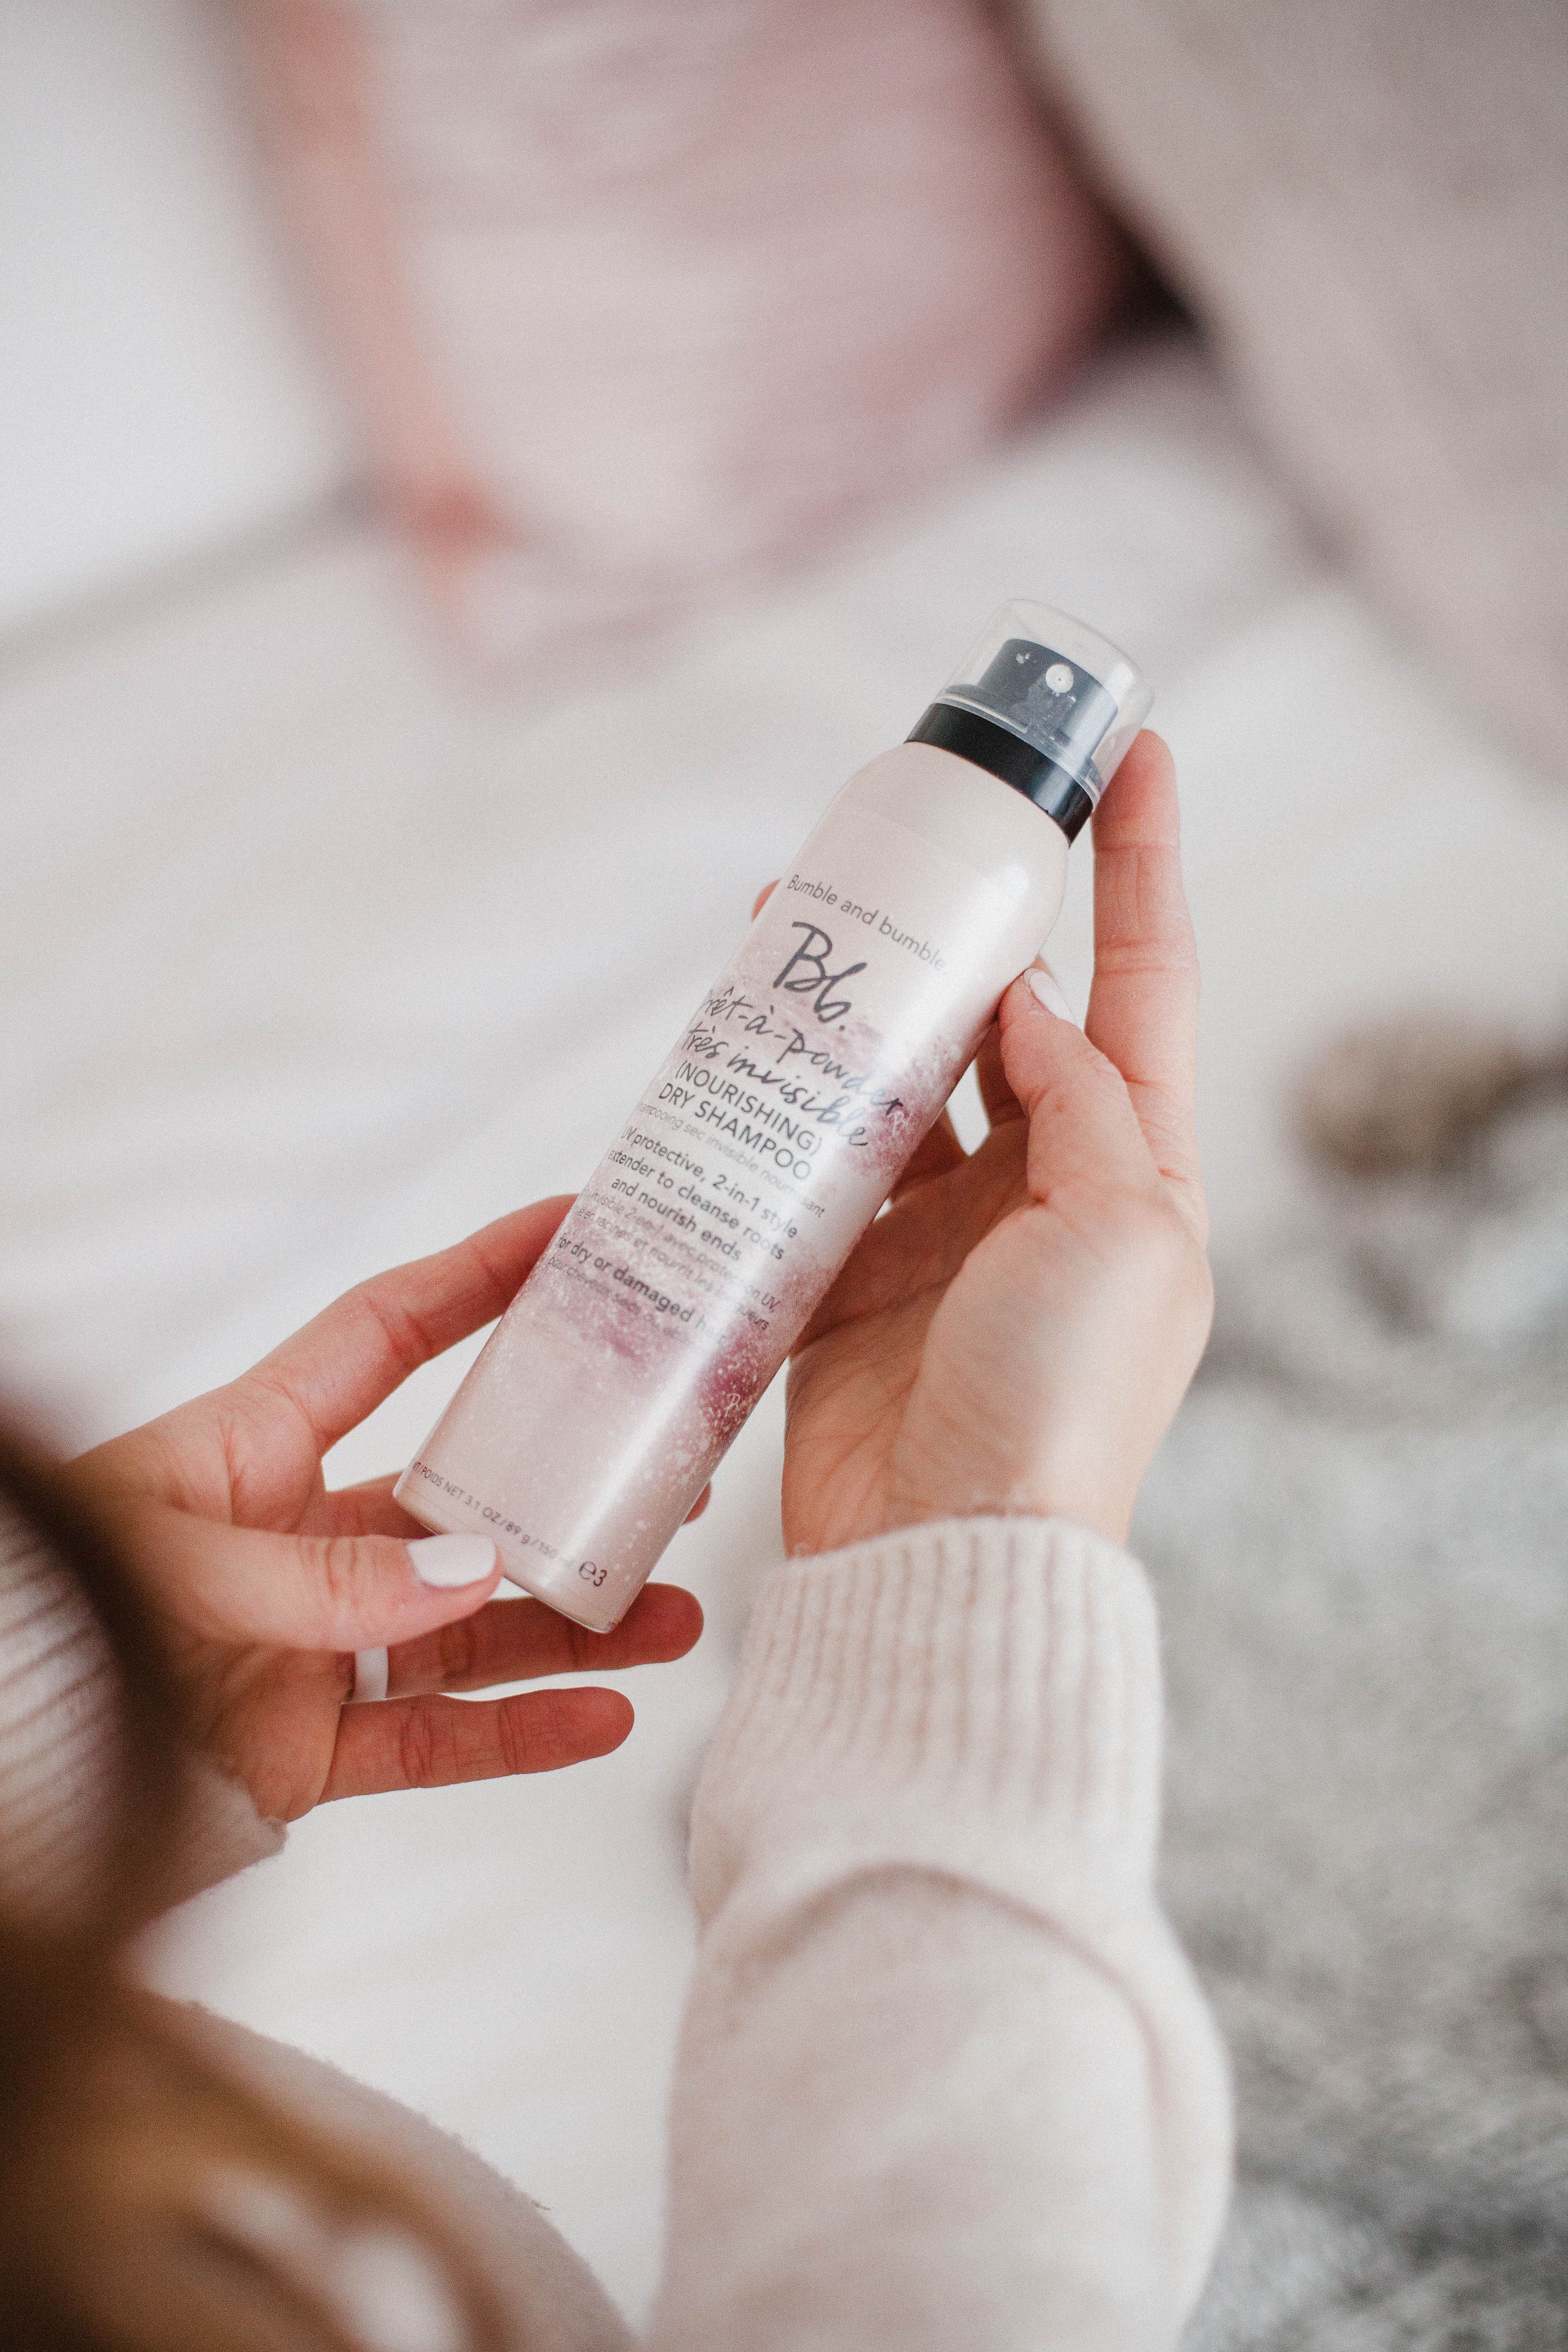 Life and style blogger Lauren McBride shares How to Use Dry Shampoo, plus her top picks for the best dry shampoo on the market. 